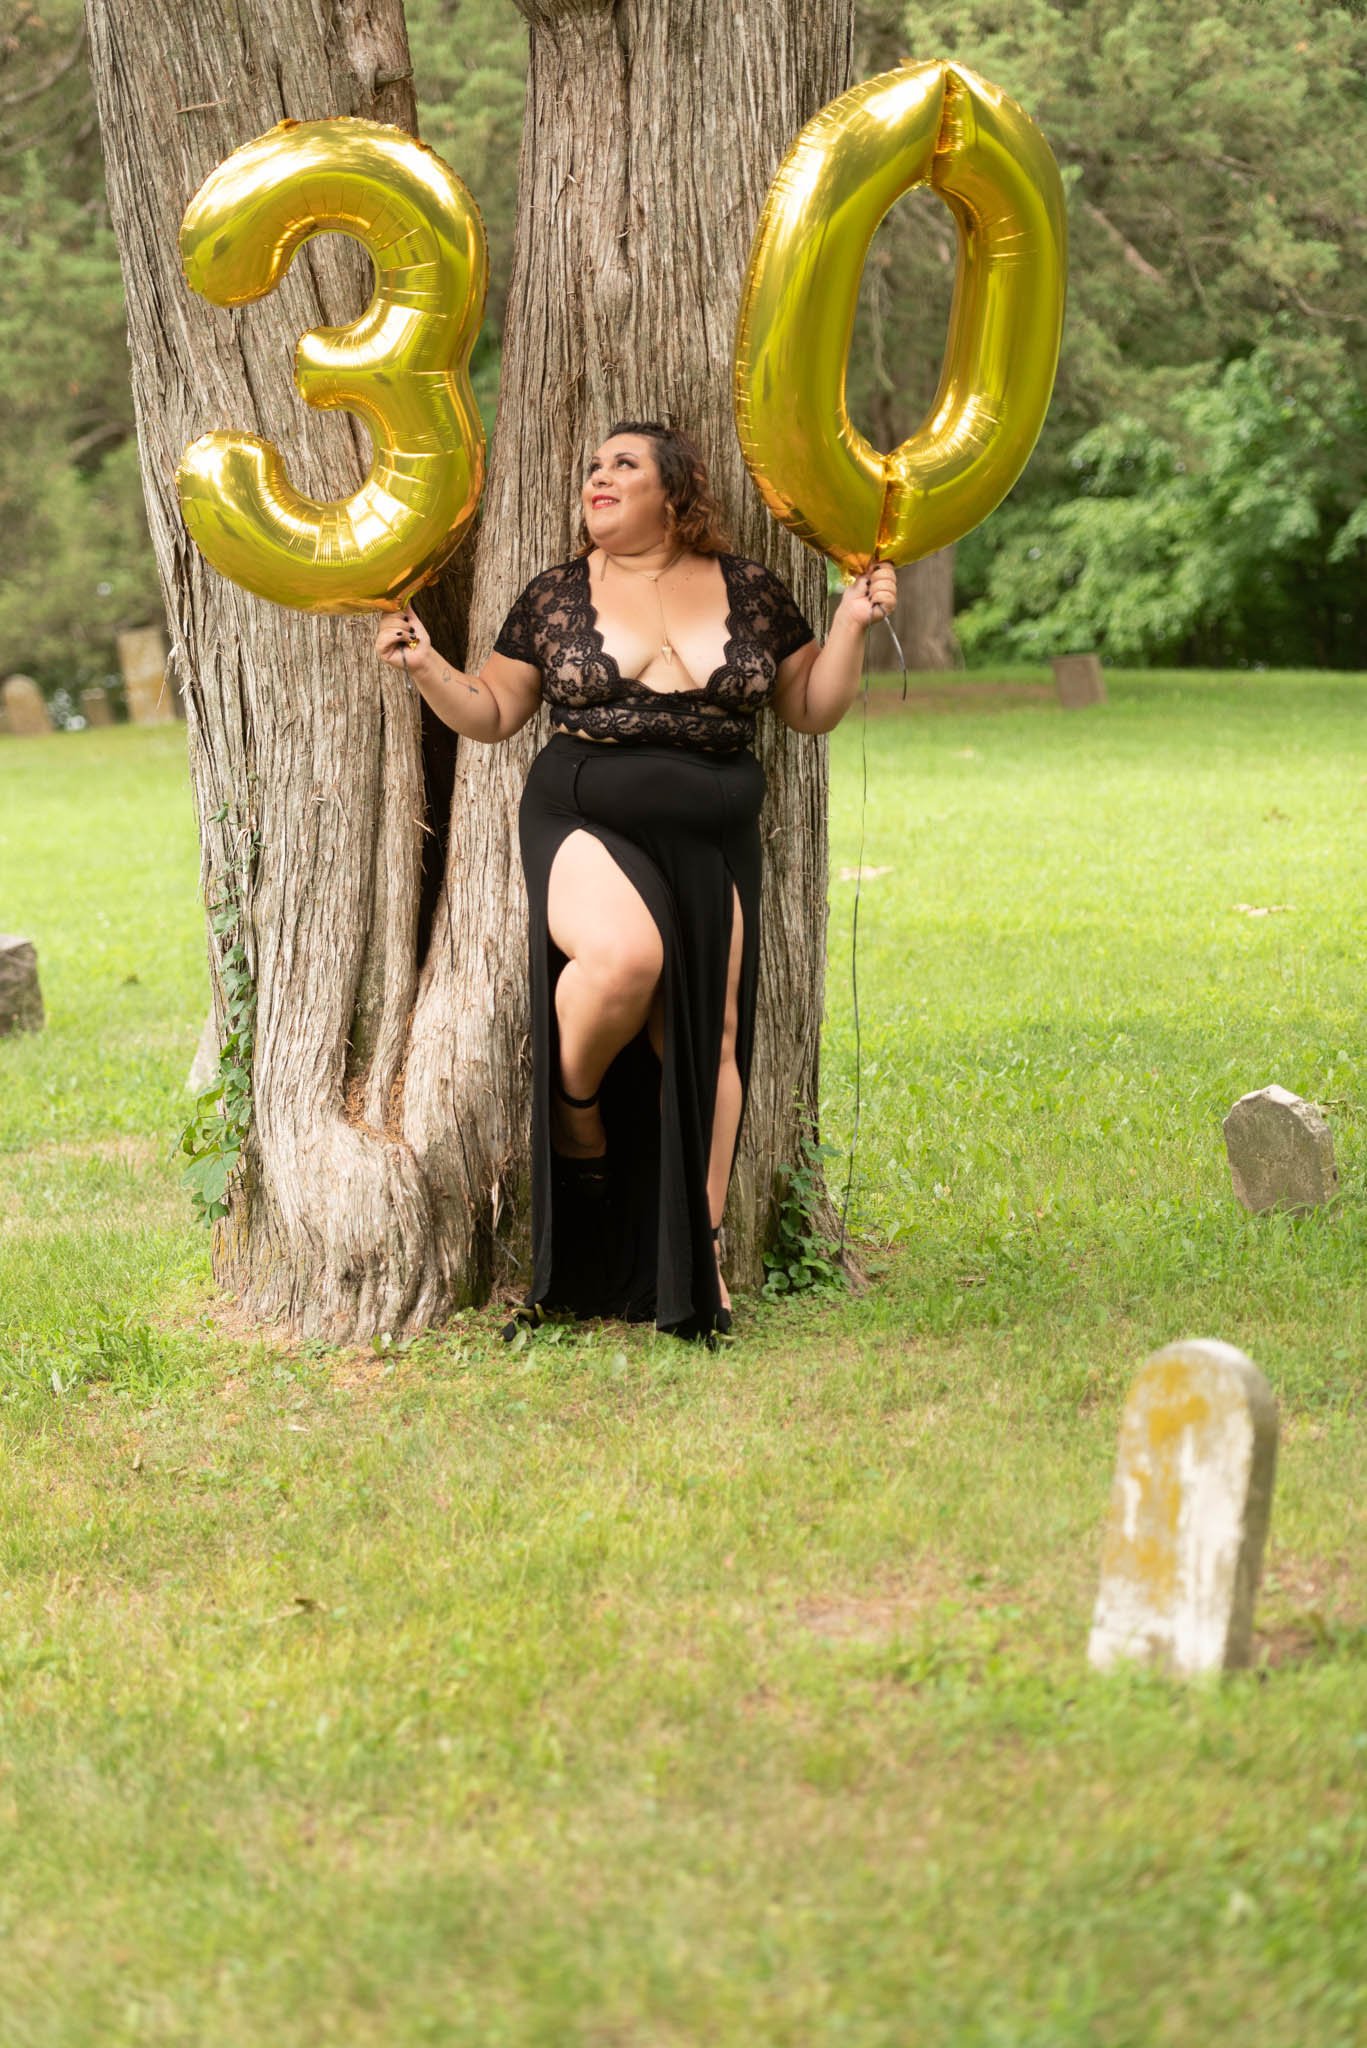  Samantha in black dress poses fiercely against a tree in cemetery holding gold foil balloons displaying the number 30. 